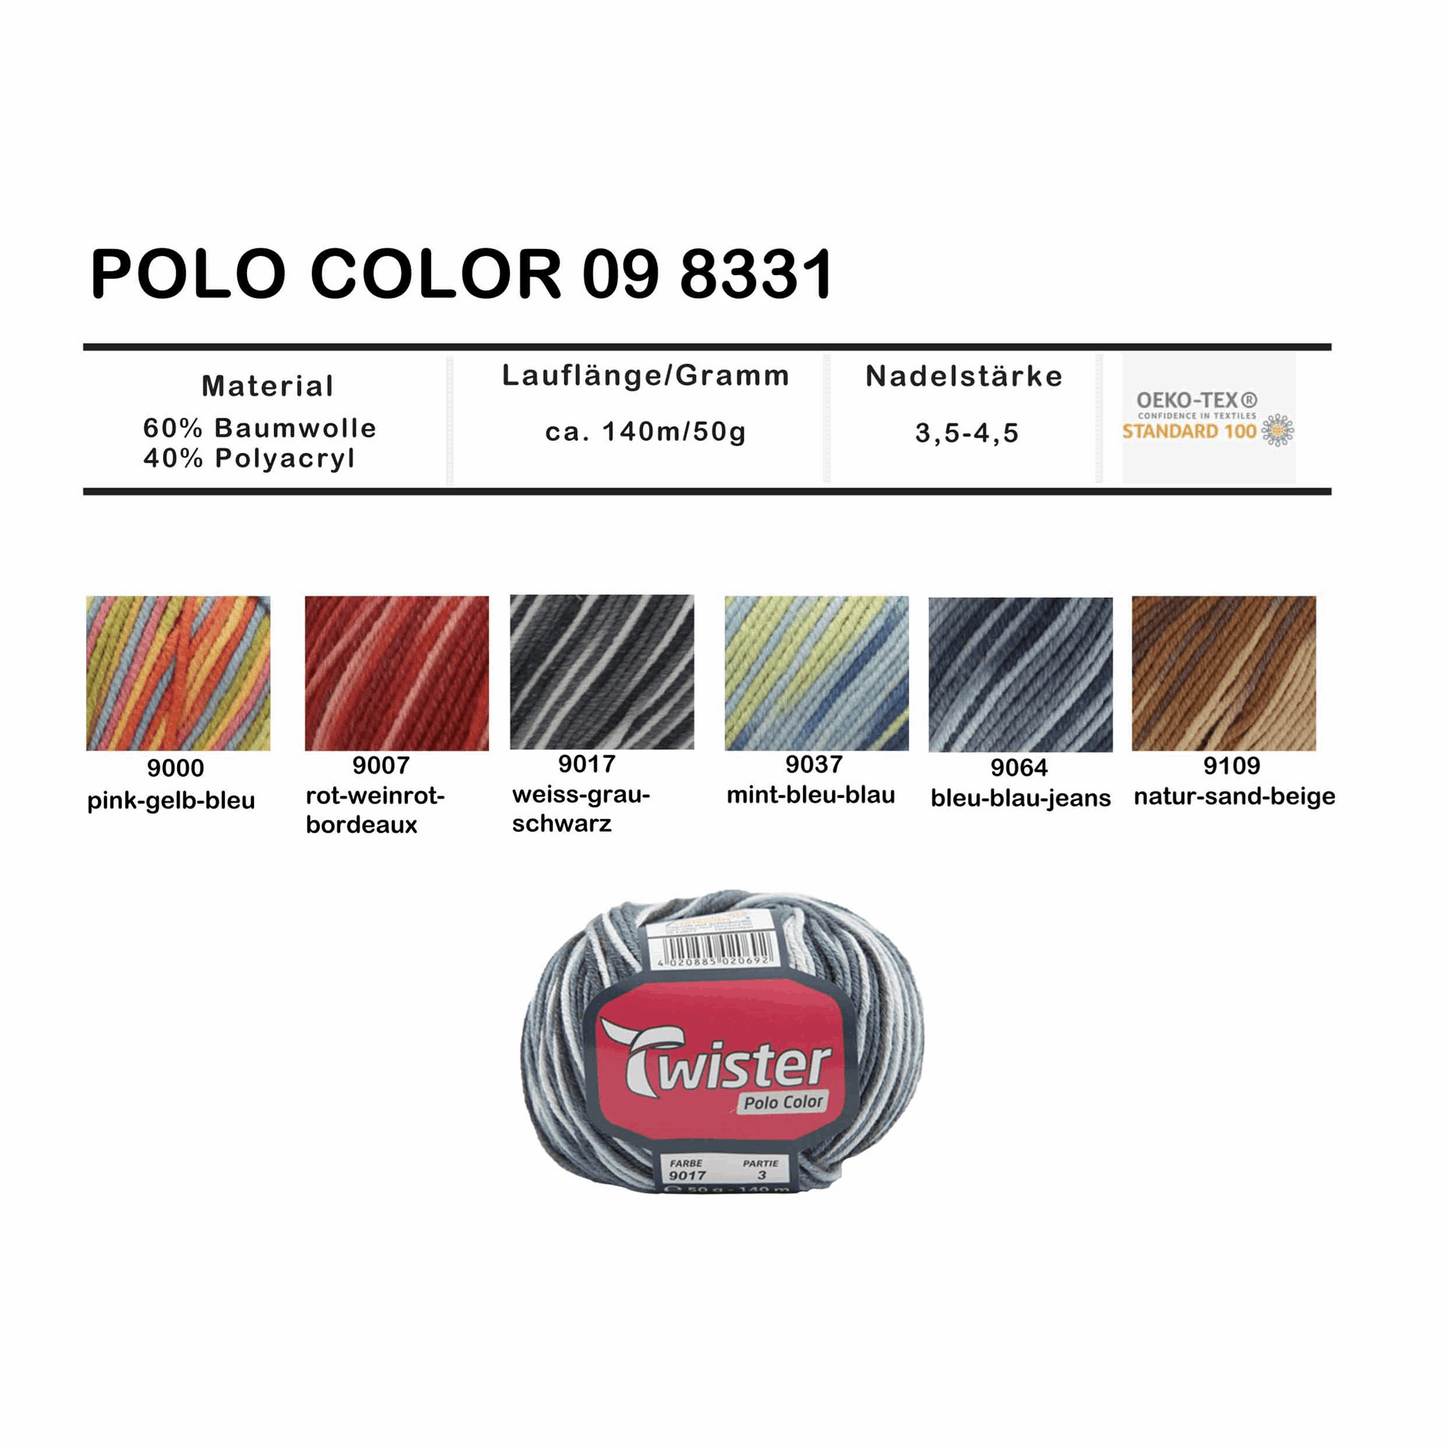 Twister Polo color, 50g, 98331, Farbe pink/gelb/bl 9000